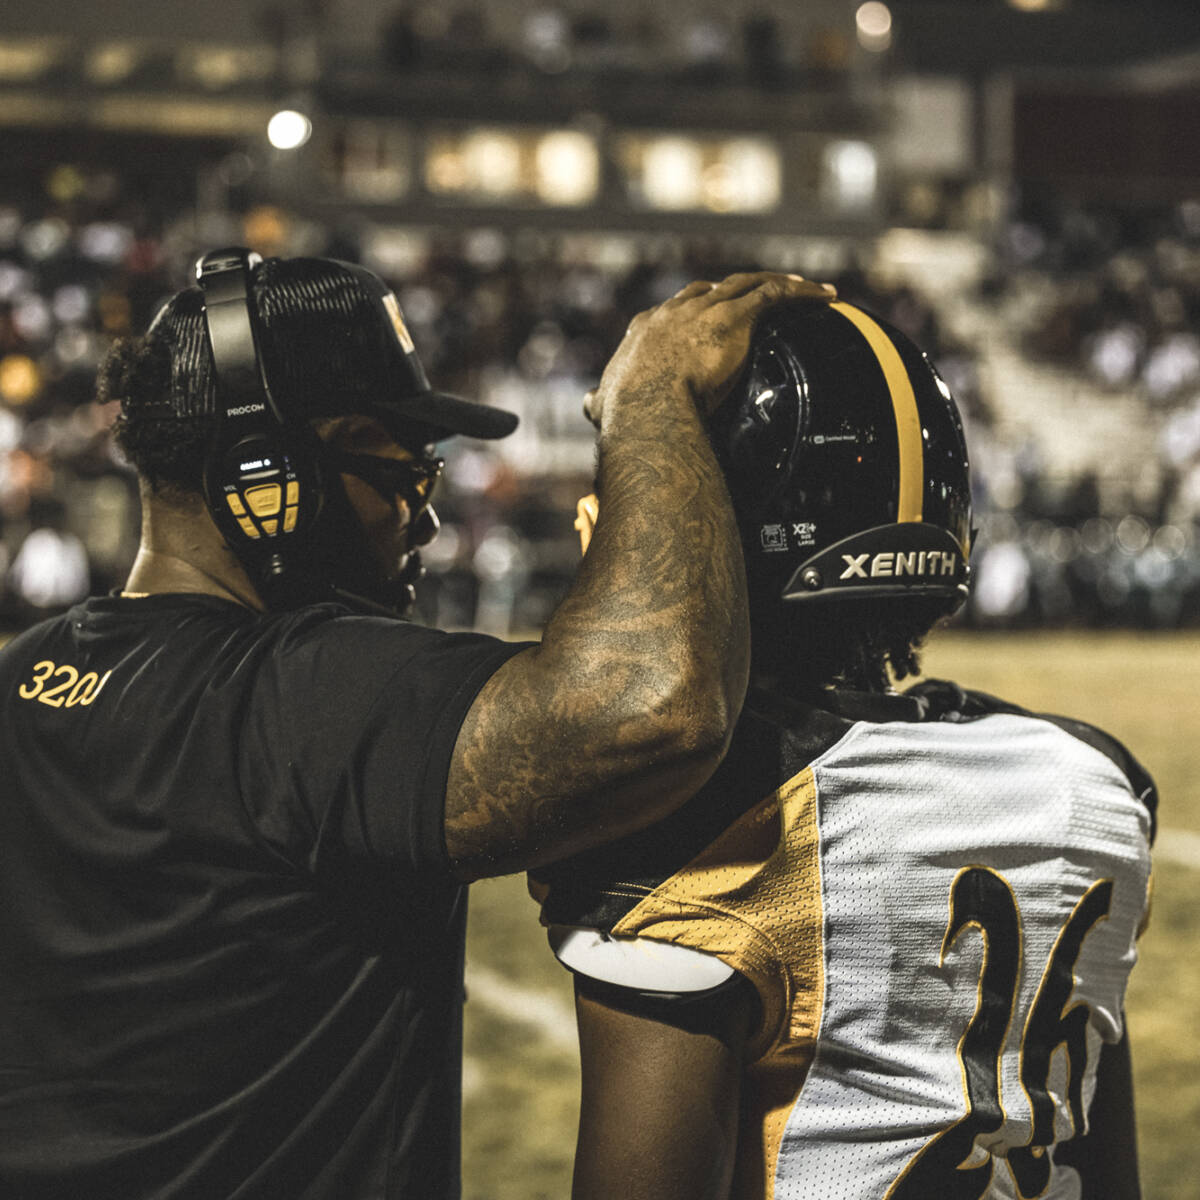 A coach putting his hand on top of a player's helmet while talking to him on the sideline.